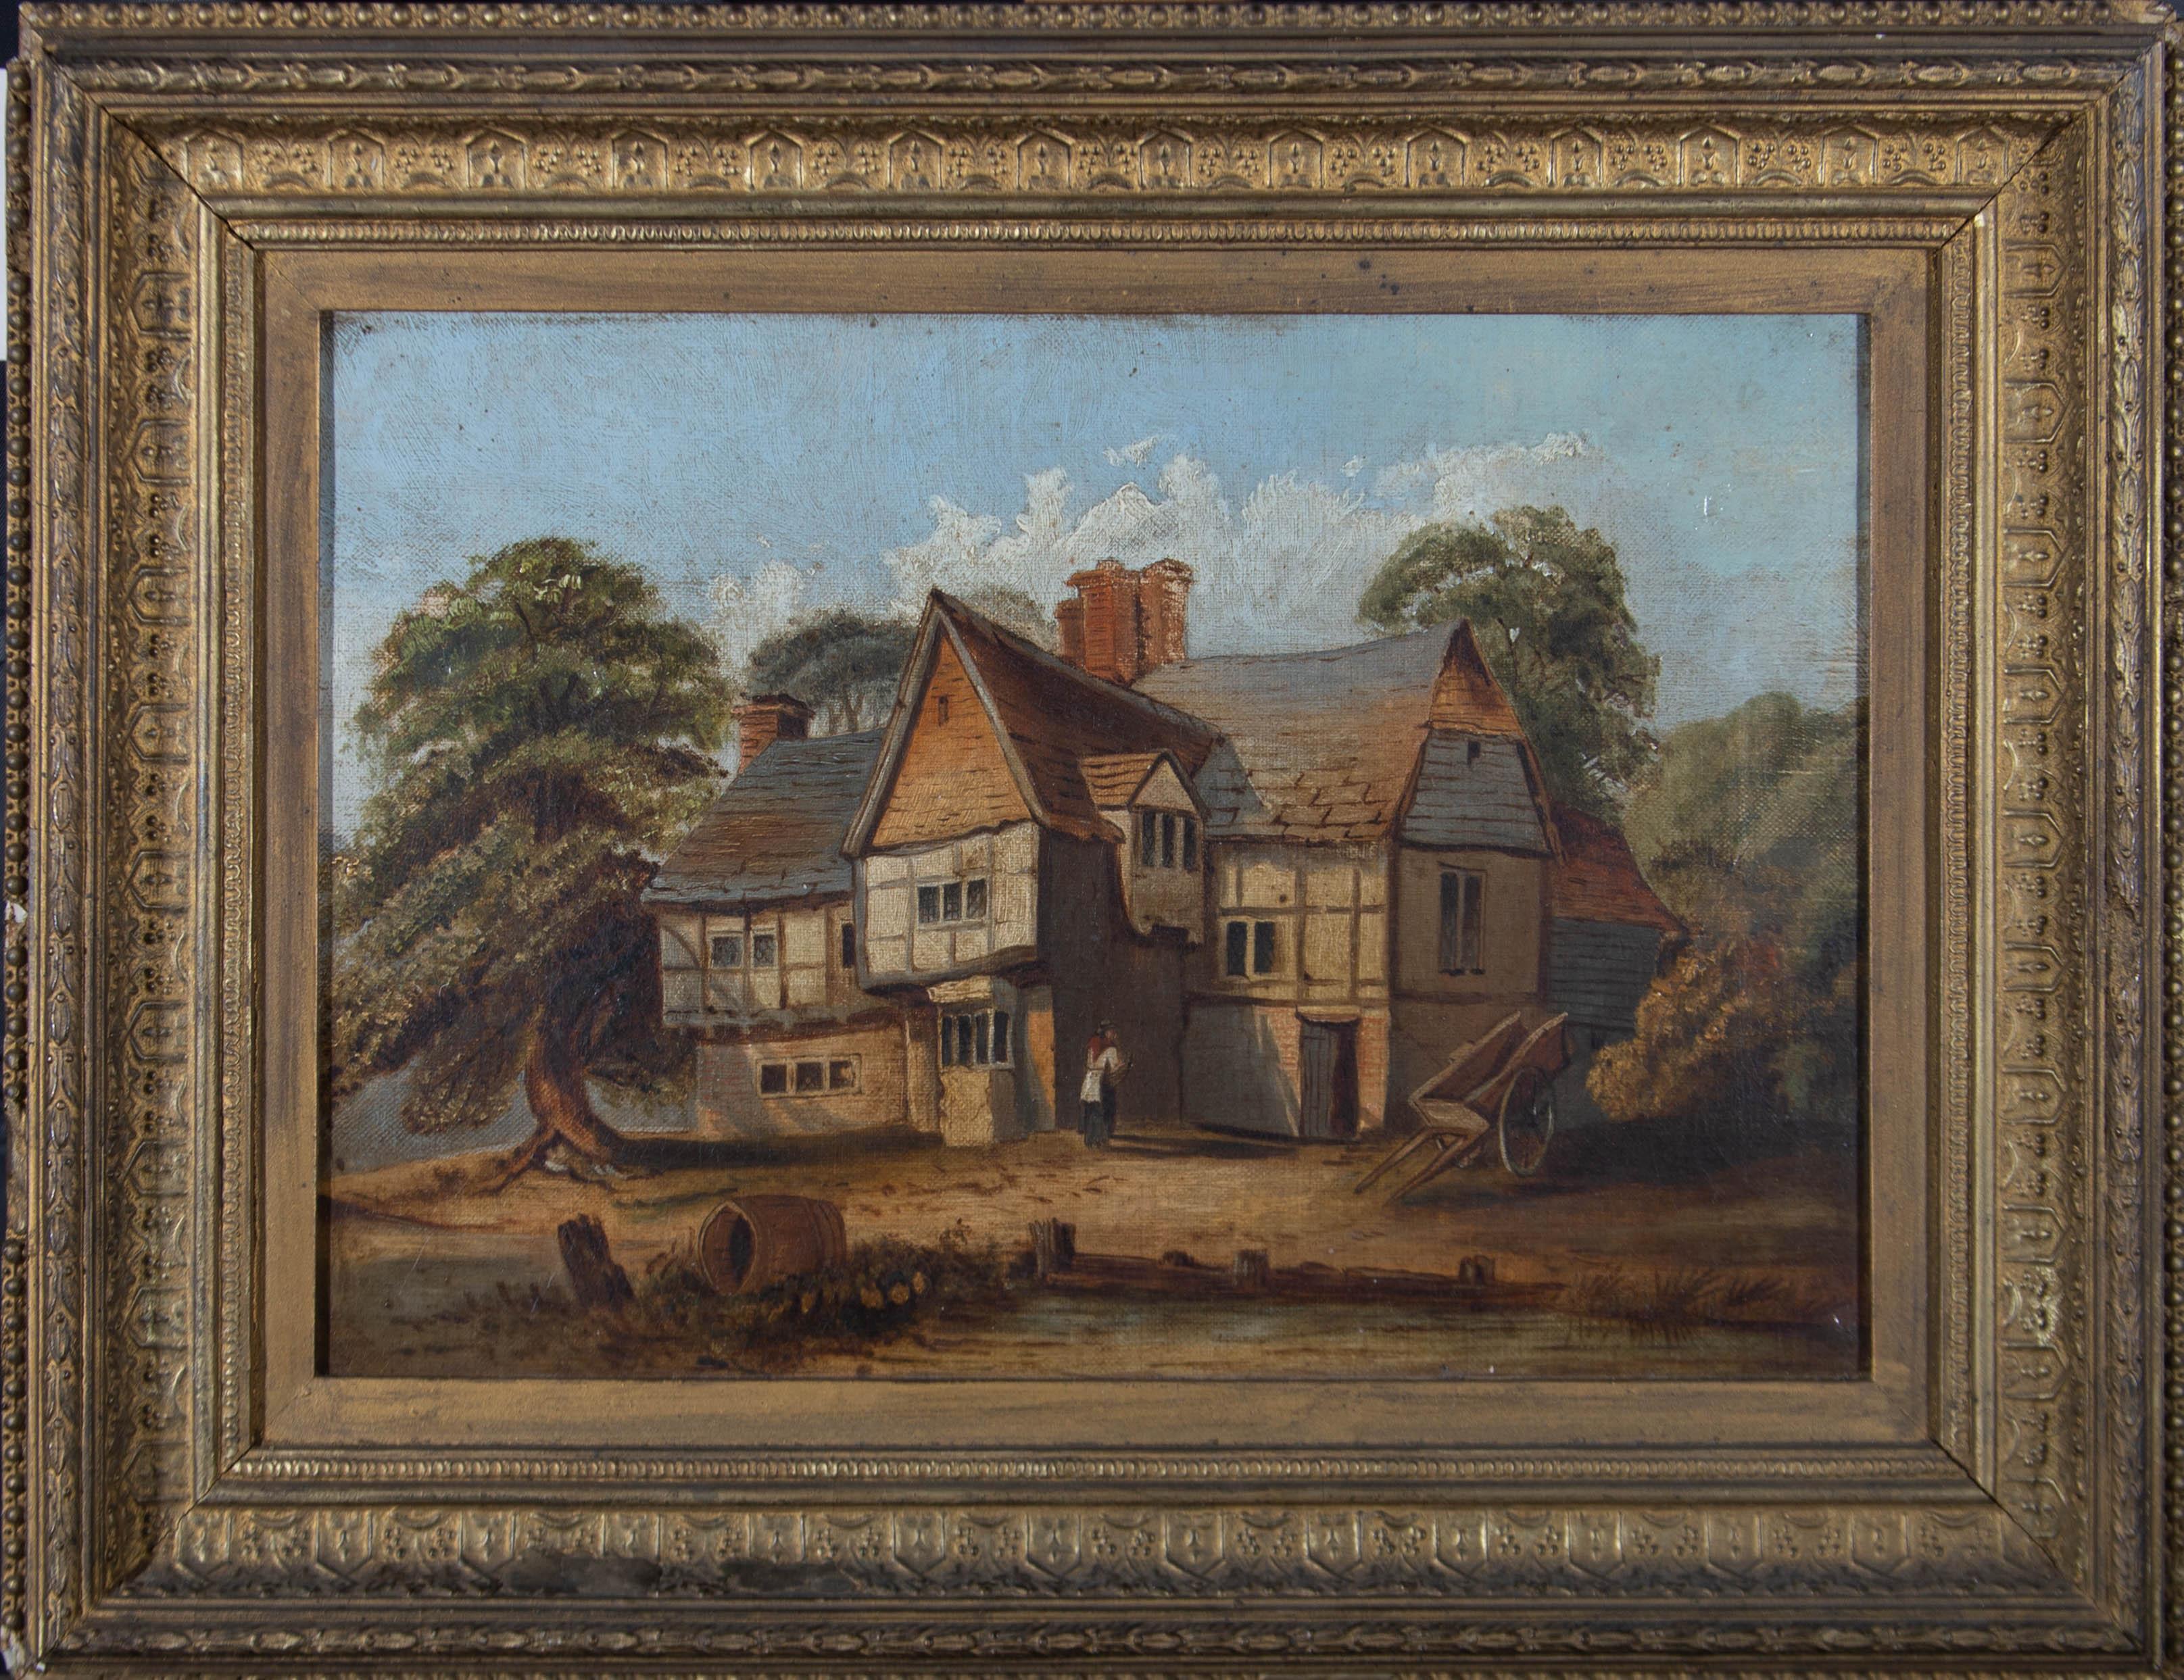 Unknown Landscape Painting - Framed 19th Century Oil - Tudor Cottage in the Countryside